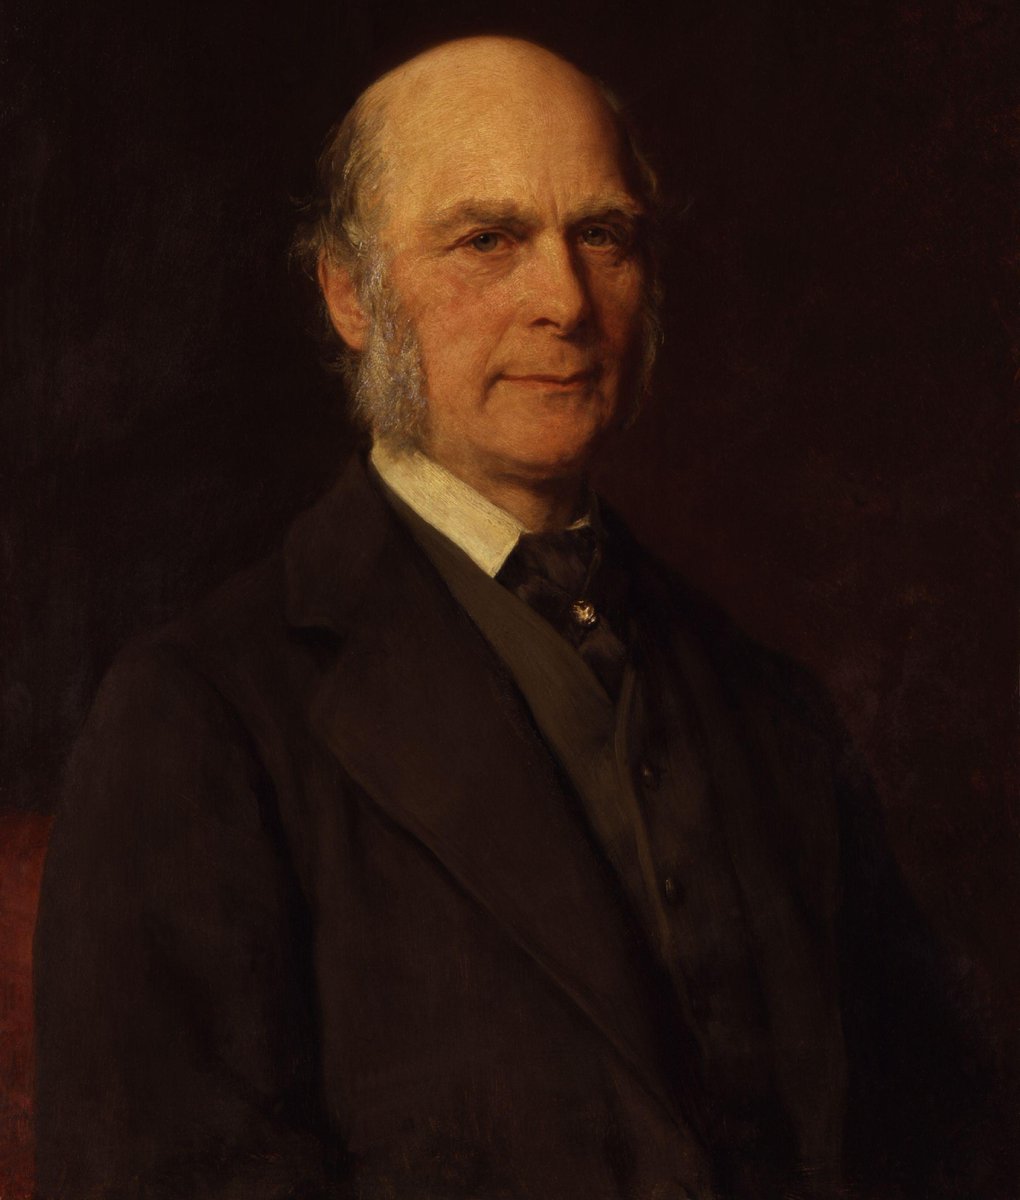 The Eugenics Movement was founded by Francis Galton. He was the cousin of Charles Darwin. He modeled eugenics after the British upper class. He believed that the elite's upper position throughout society was based on genetics (he was wrong).